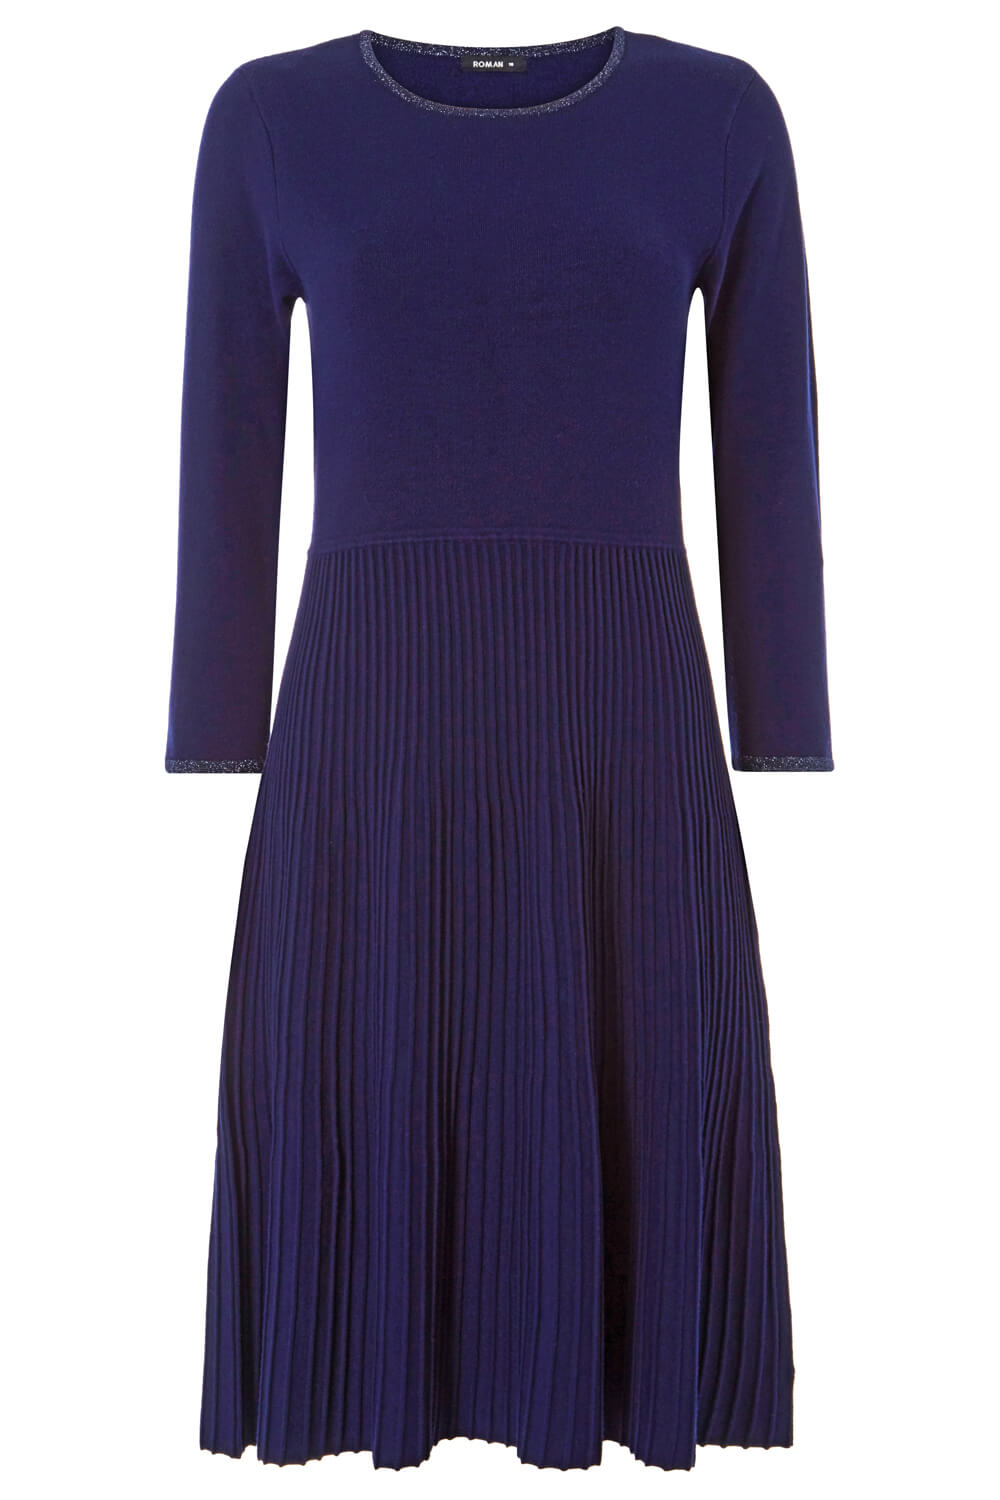 Navy  Fit and Flare Knitted Dress, Image 5 of 5